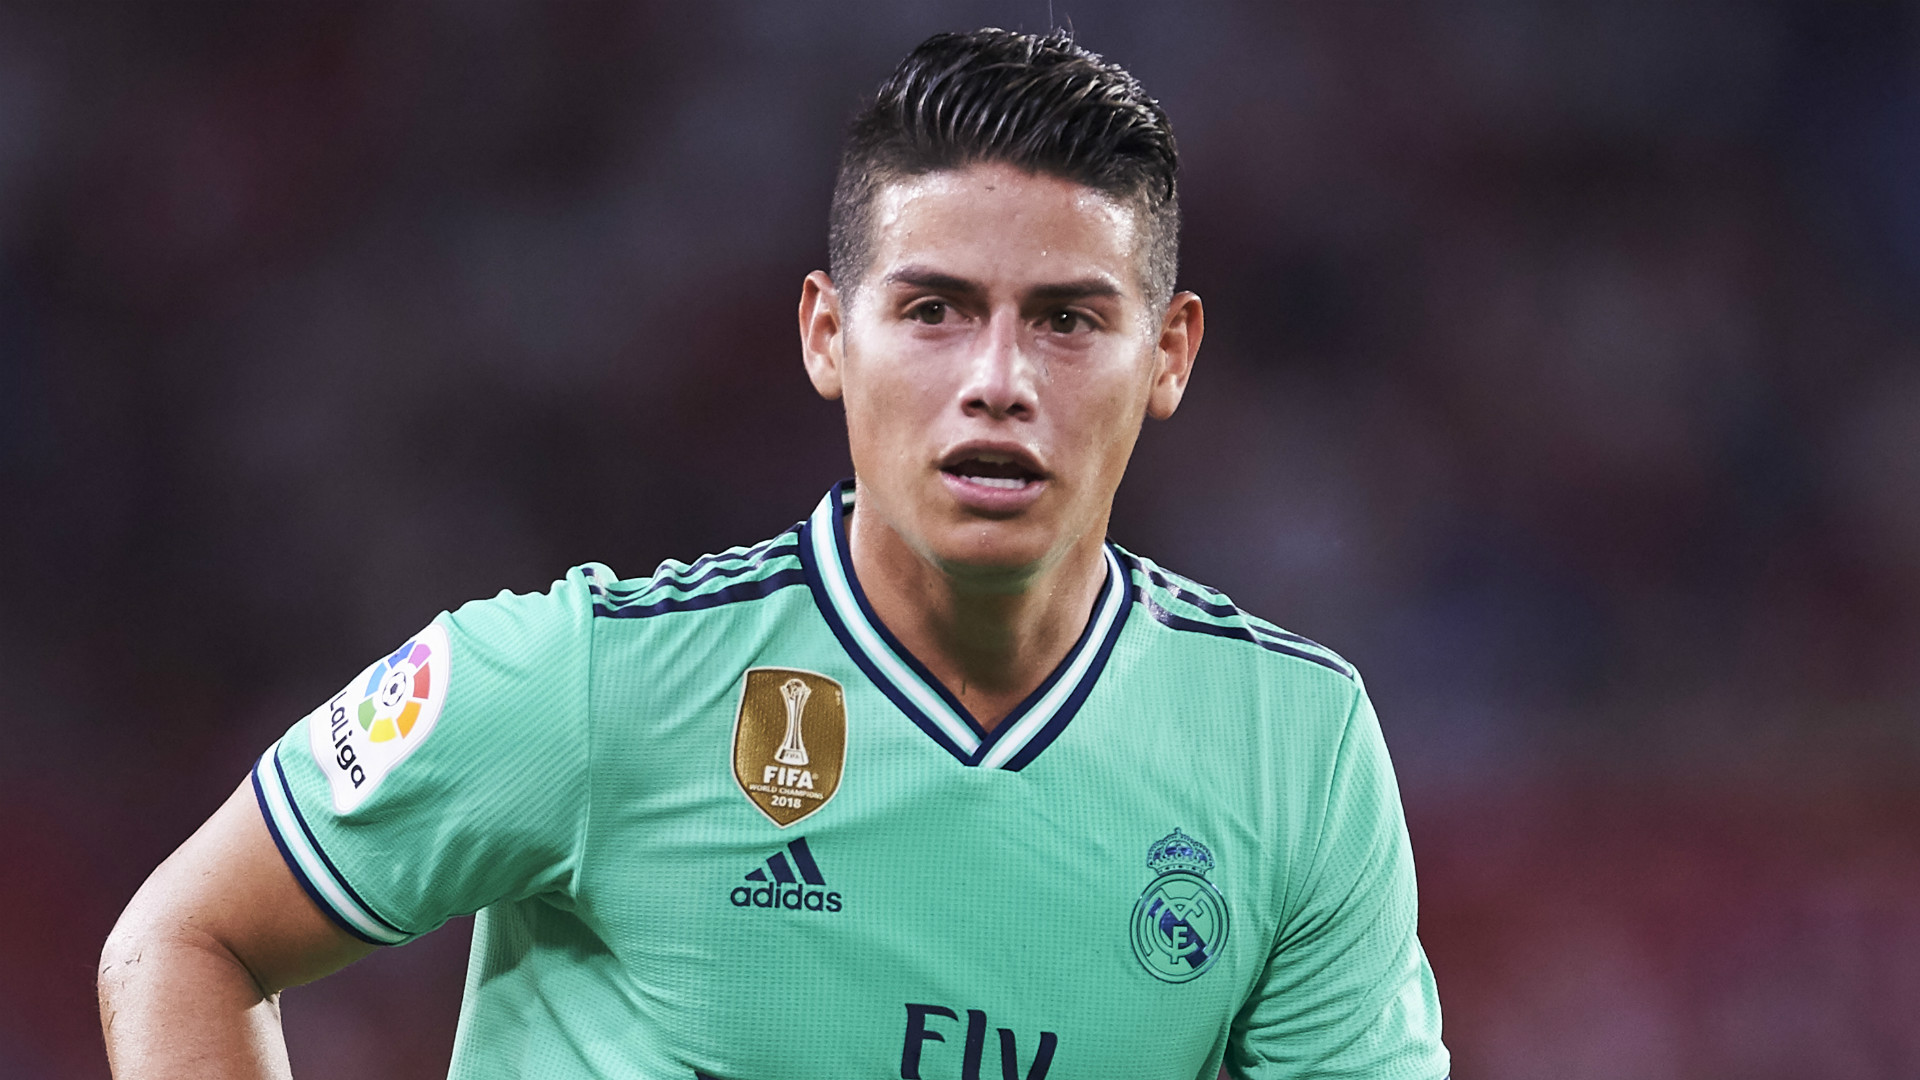 james rodriguez jersey number real madrid 2019